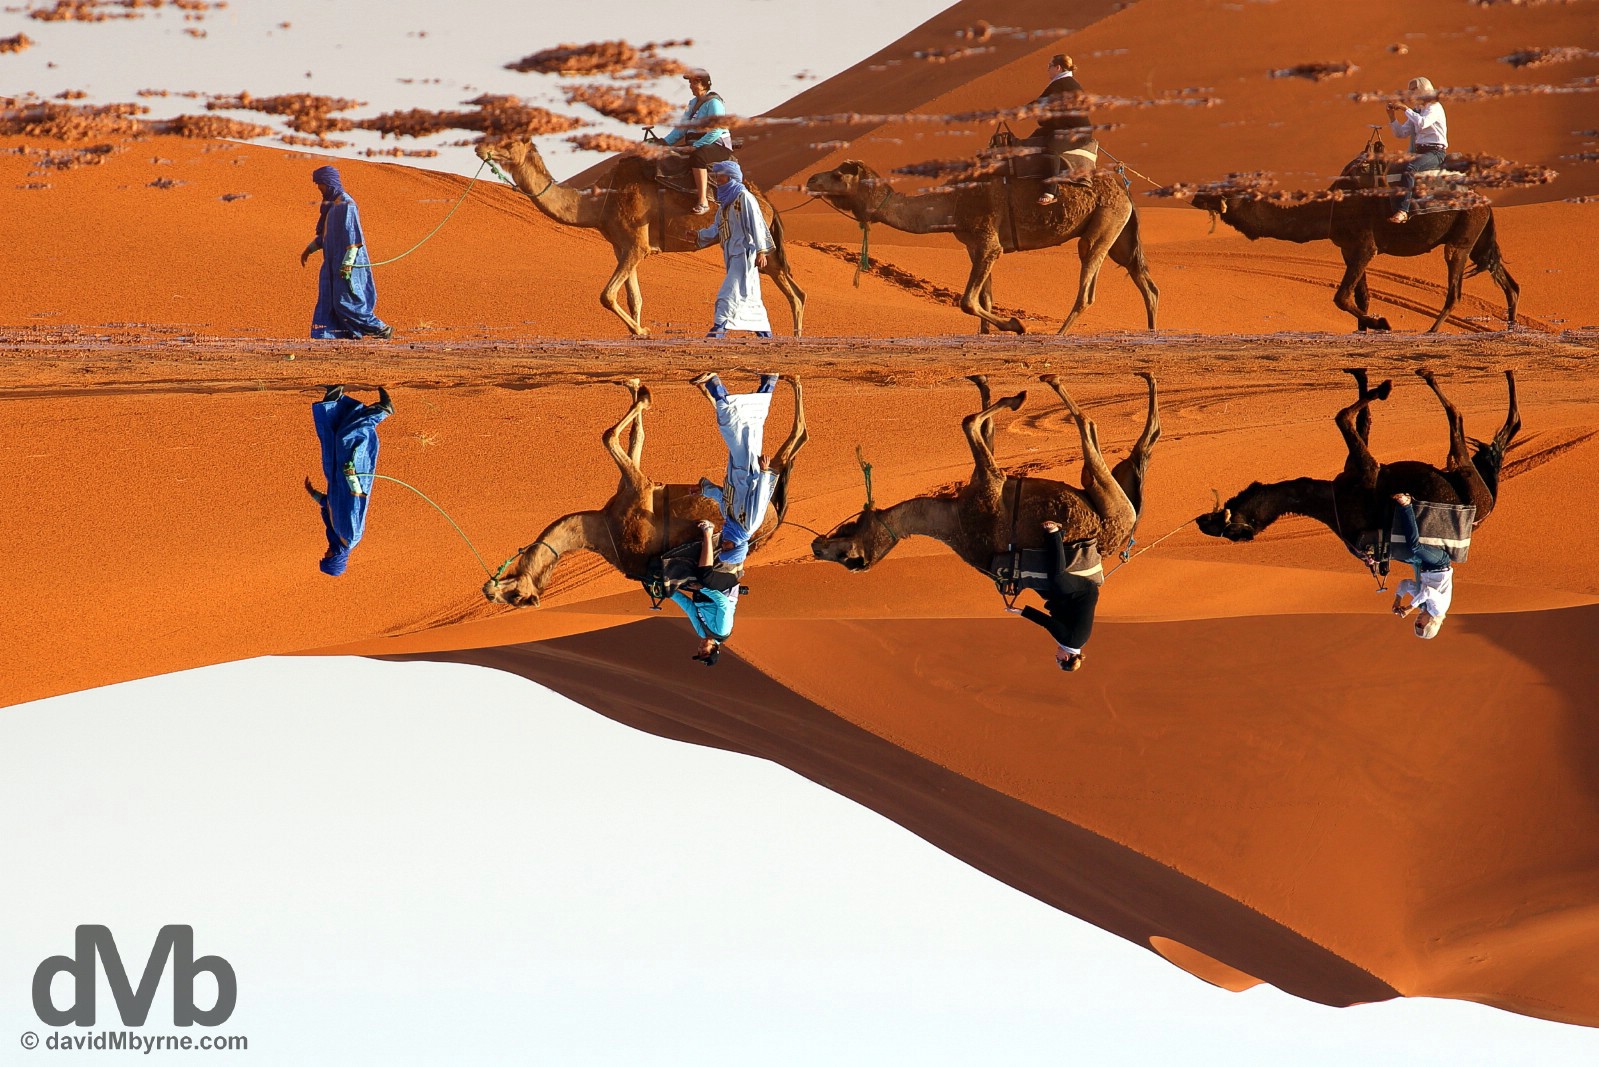 An inverted camel train reflection in the desert of Erg Chebbi, southeastern Morocco. May 19, 2014.